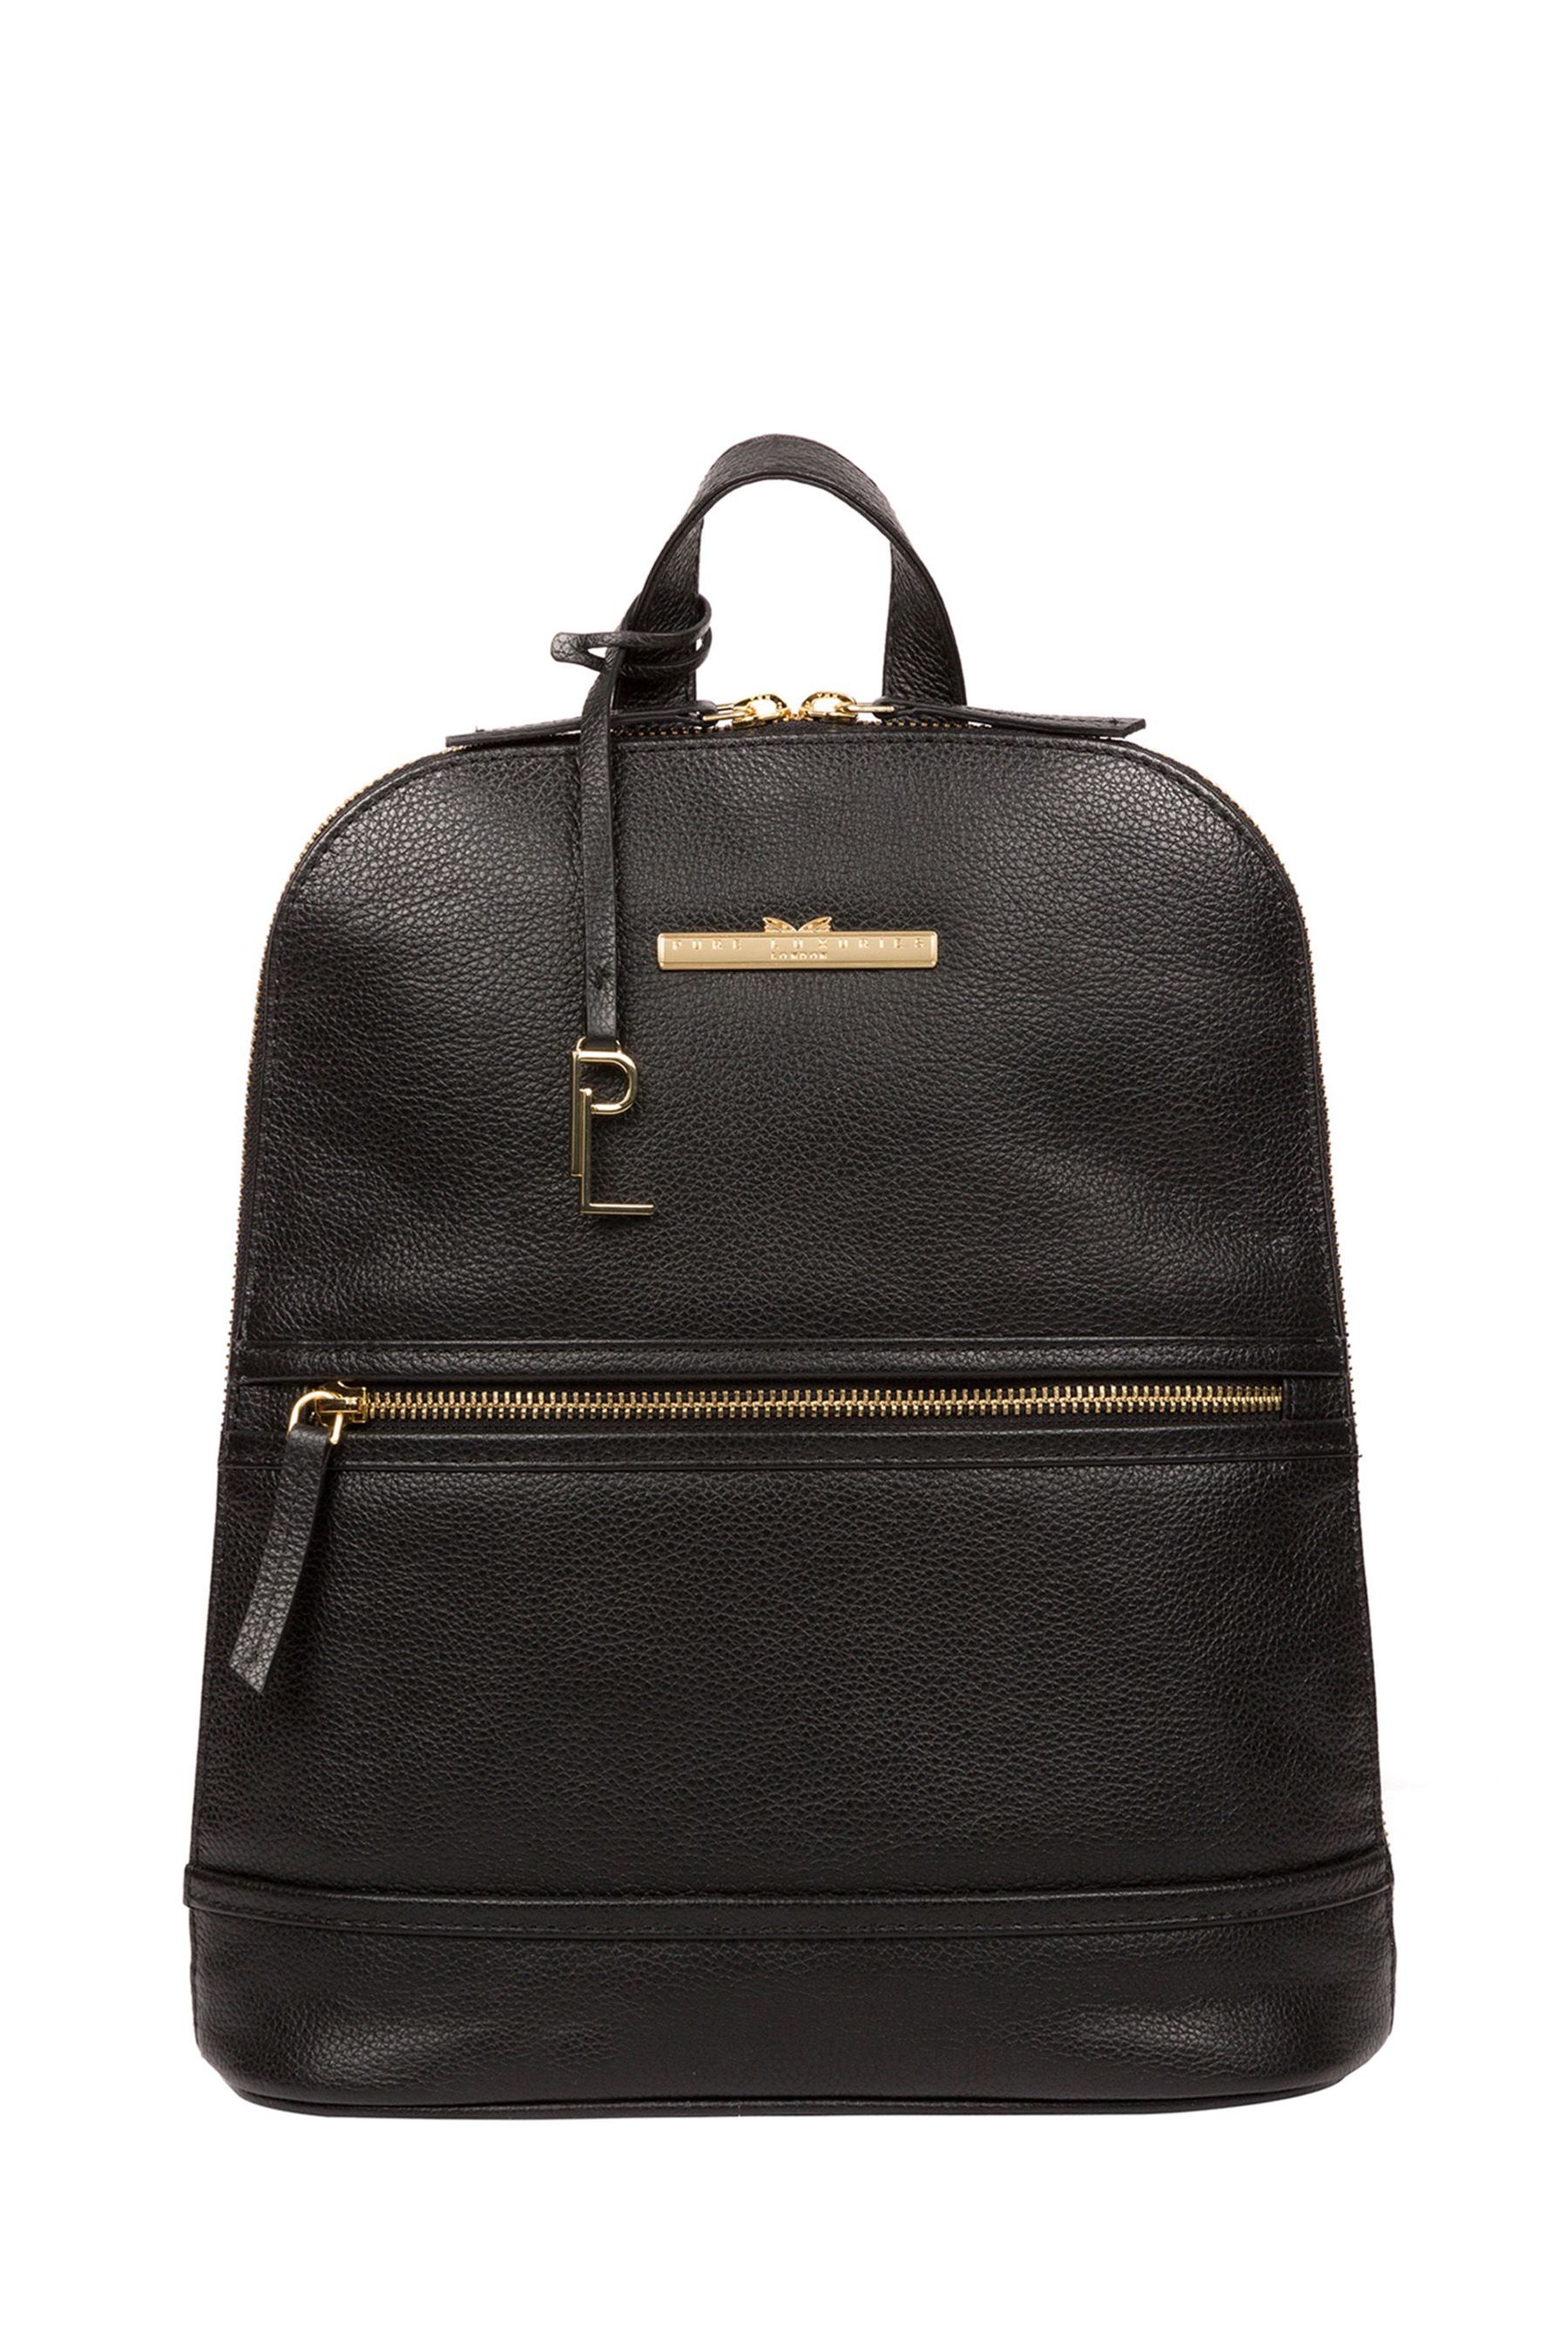 Buy Pure Luxuries London Elland Leather Backpack from Next Australia